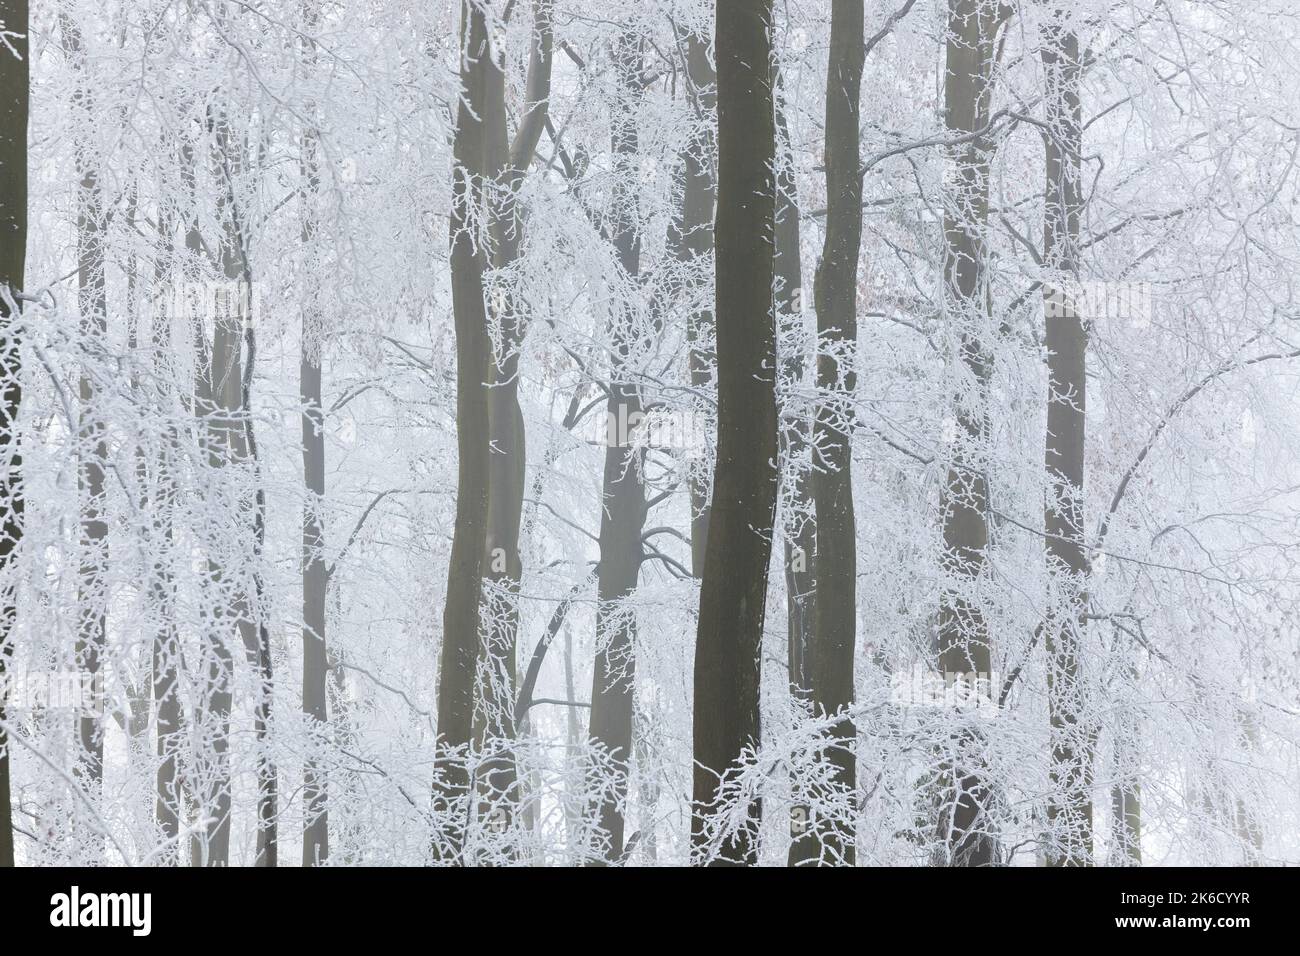 Trees with snow and frost, nr Wotton, Gloucestershire, England, United Kingdom Stock Photo